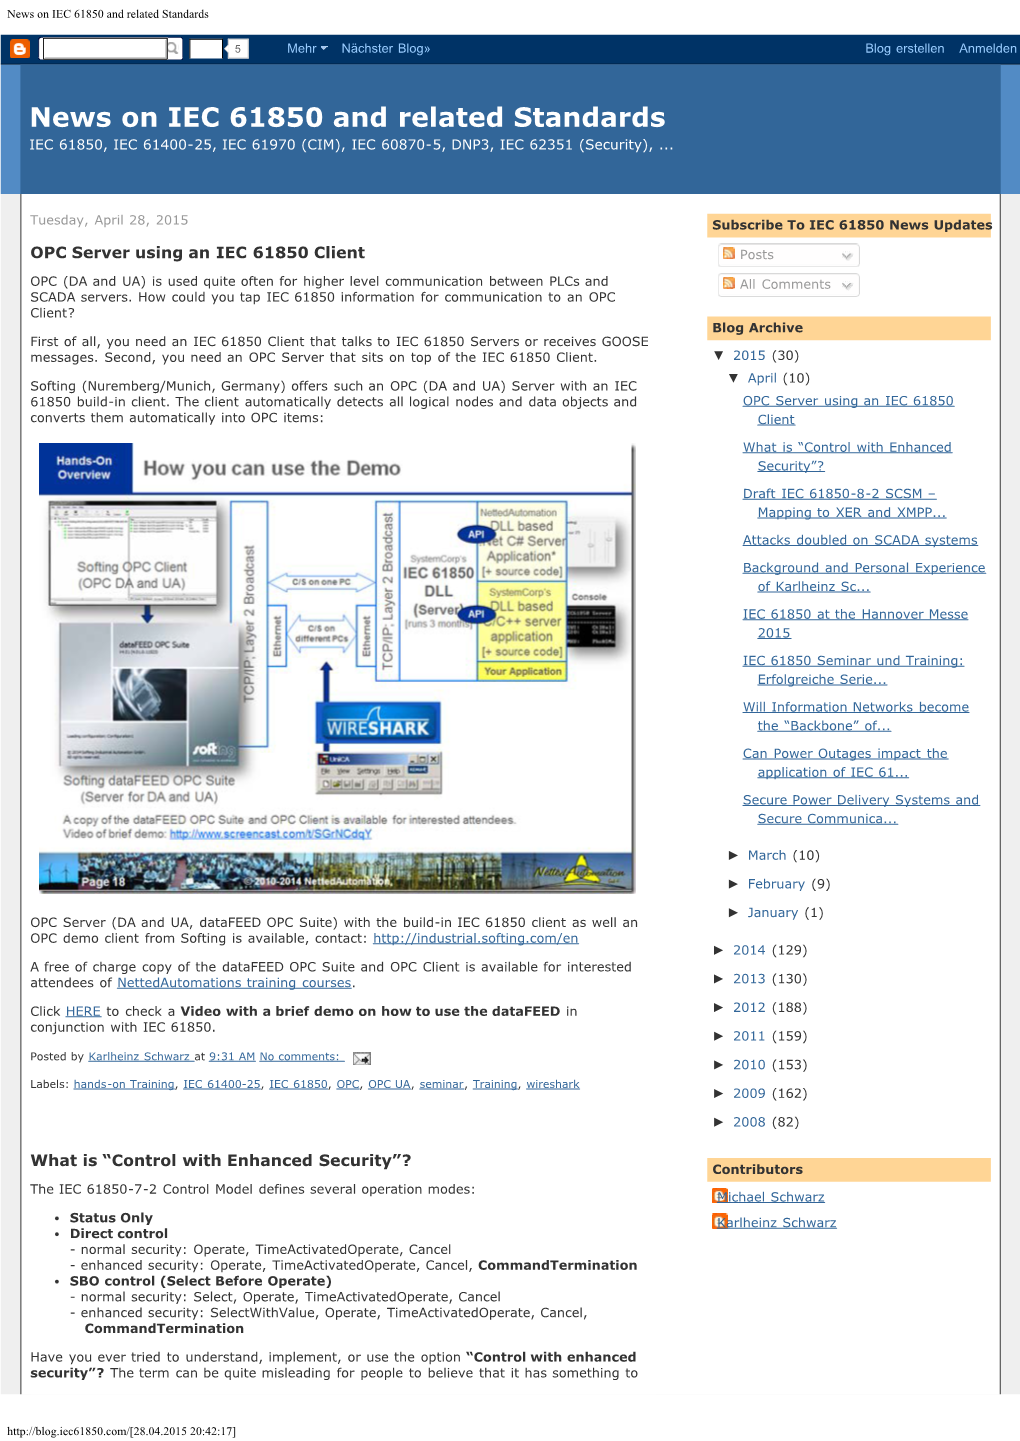 News on IEC 61850 and Related Standards